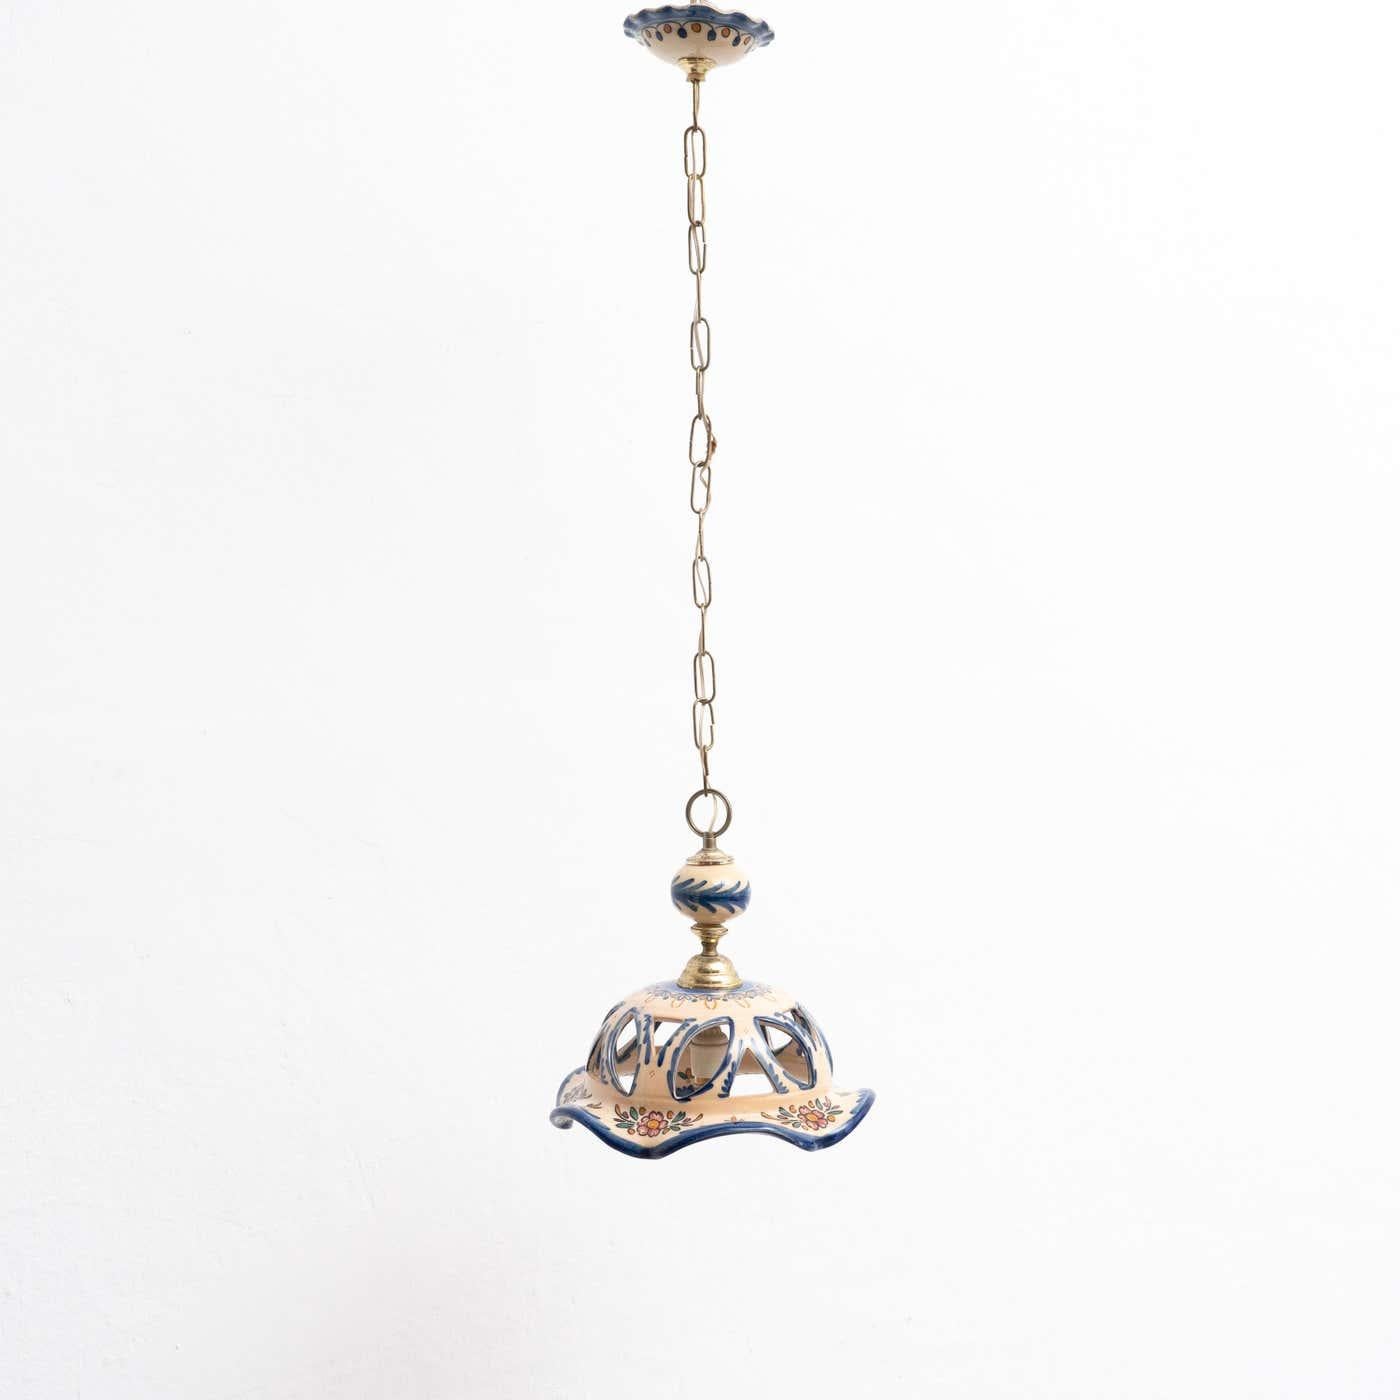 Antique ceramic ceiling lamp.

By unknown manufacturer, made in circa 1950.

In original condition, with minor wear consistent with age and use, preserving a beautiful patina.

Materials:
Ceramic.
 
Electrification not tested.